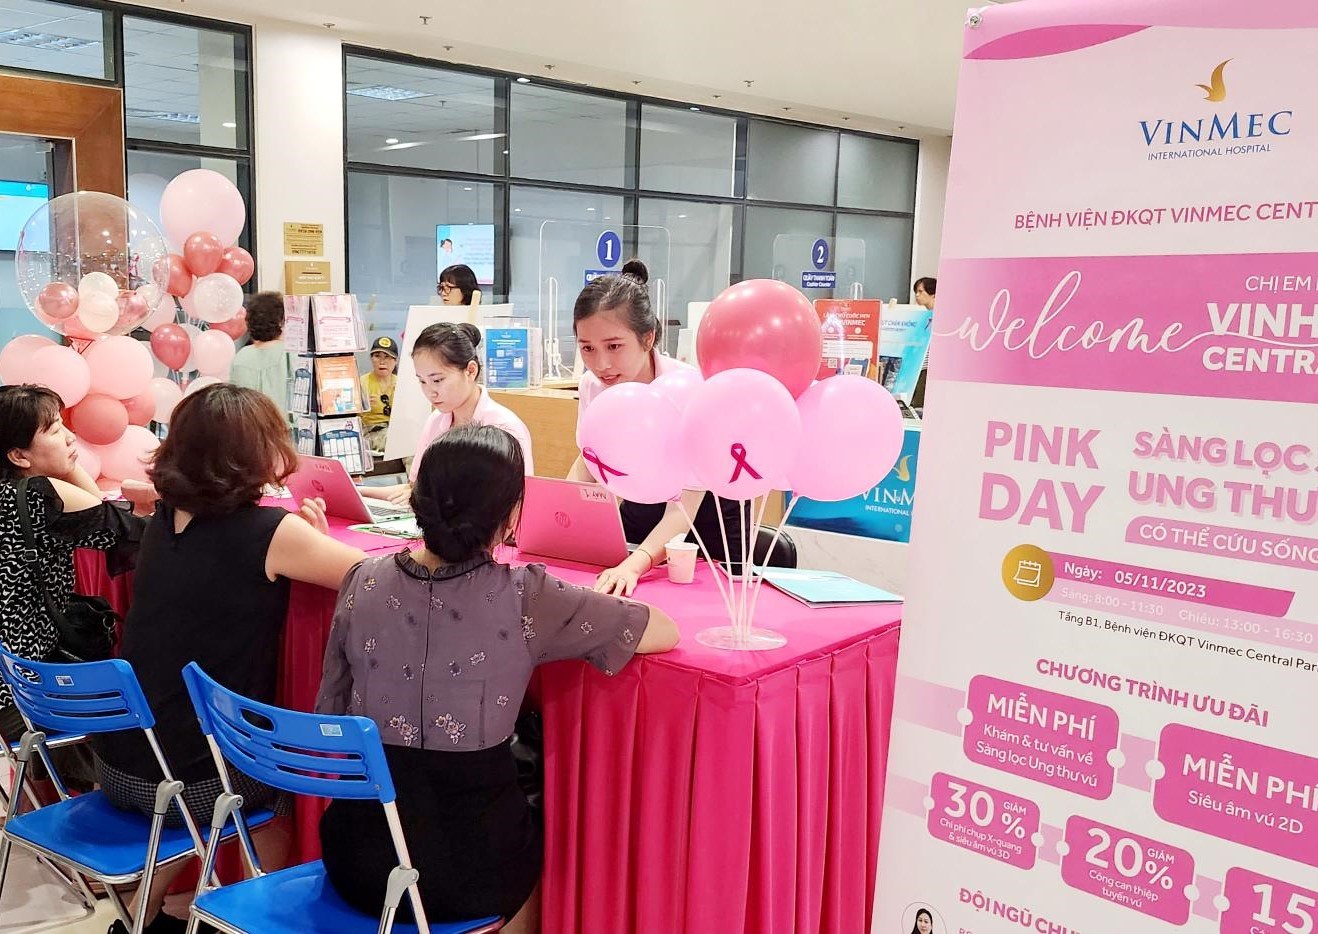 Pink Day attracts a large number of Vinhomes residents to experience high-end services as well as improve knowledge about breast health